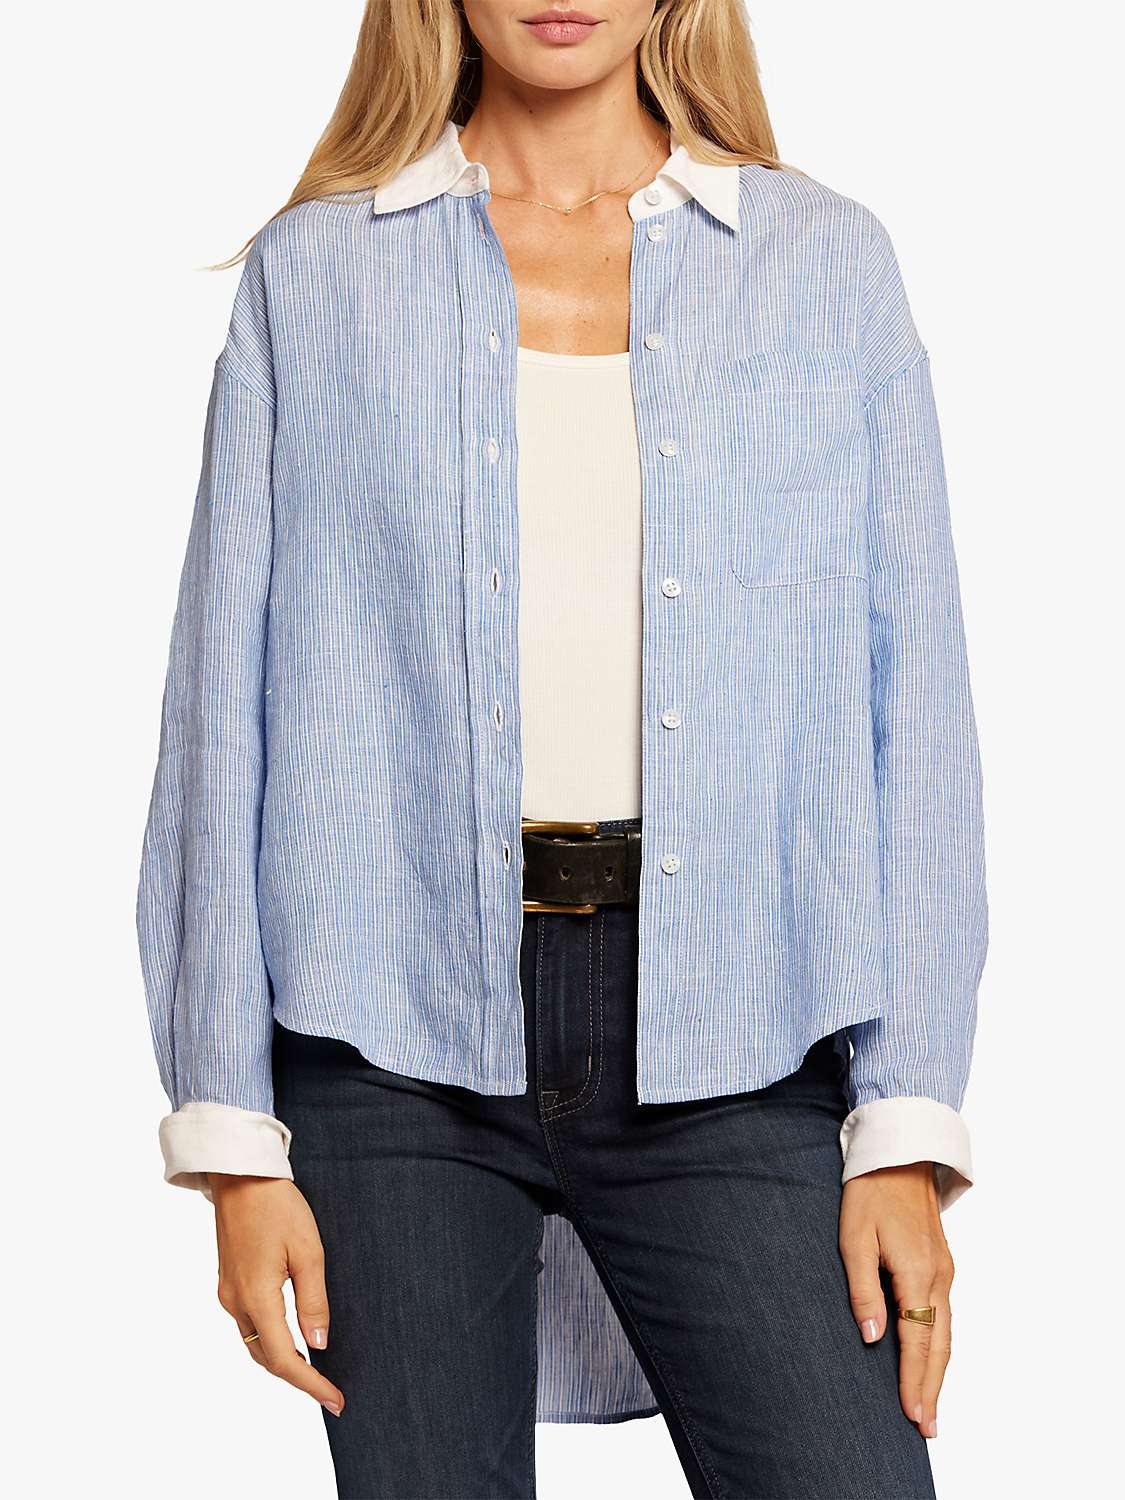 Buy Current/Elliott The Candid Relaxed Fit Linen Shirt, Blue Online at johnlewis.com